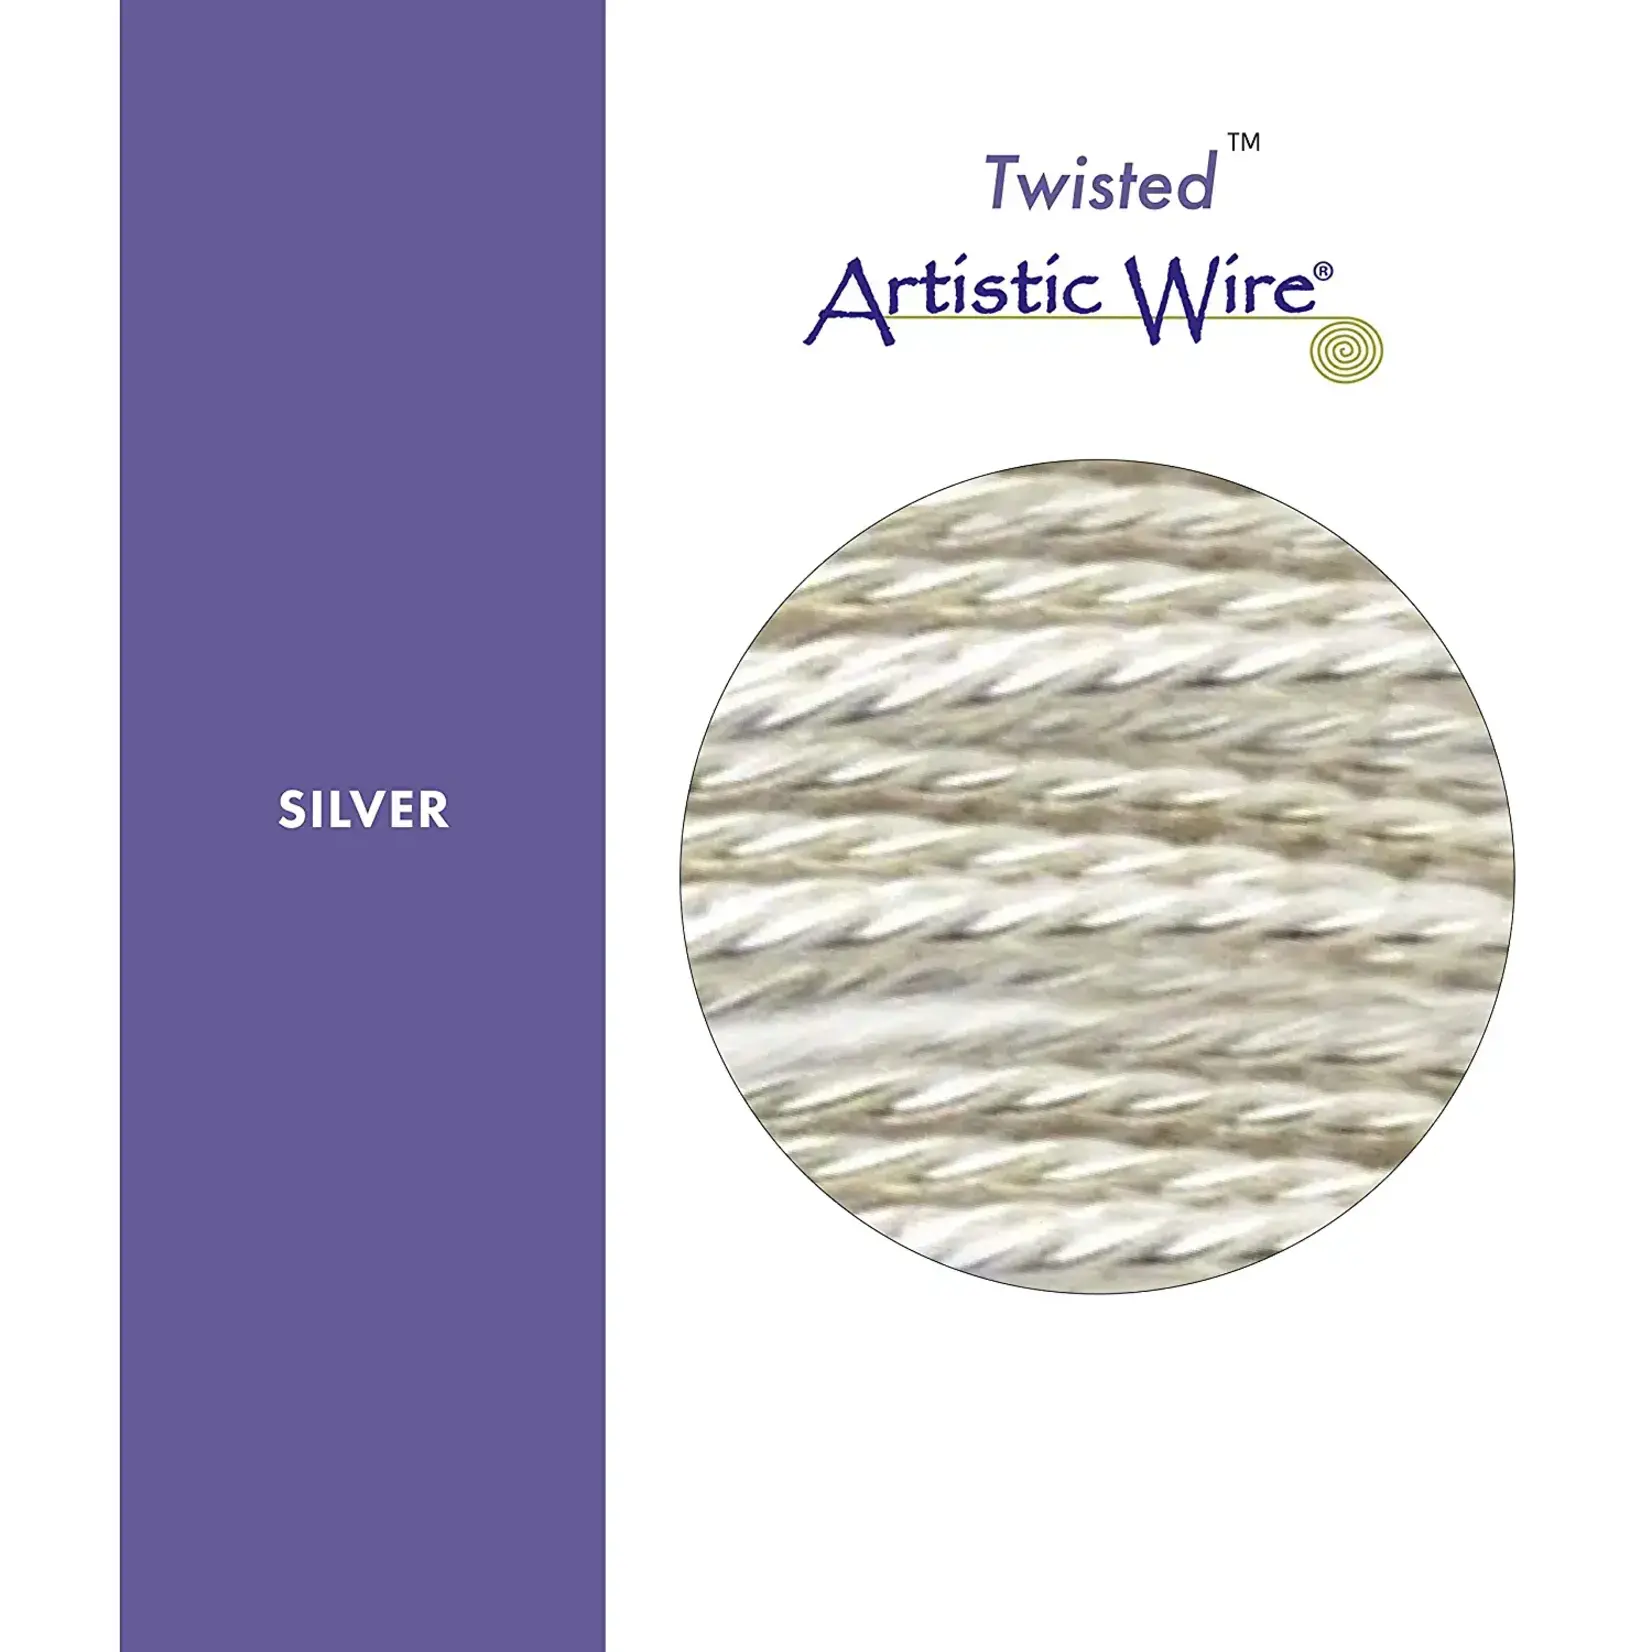 Artistic Wire Artistic Wire Tarnish Resistant Silver Twisted, 24 Gauge, 5 yard Spool